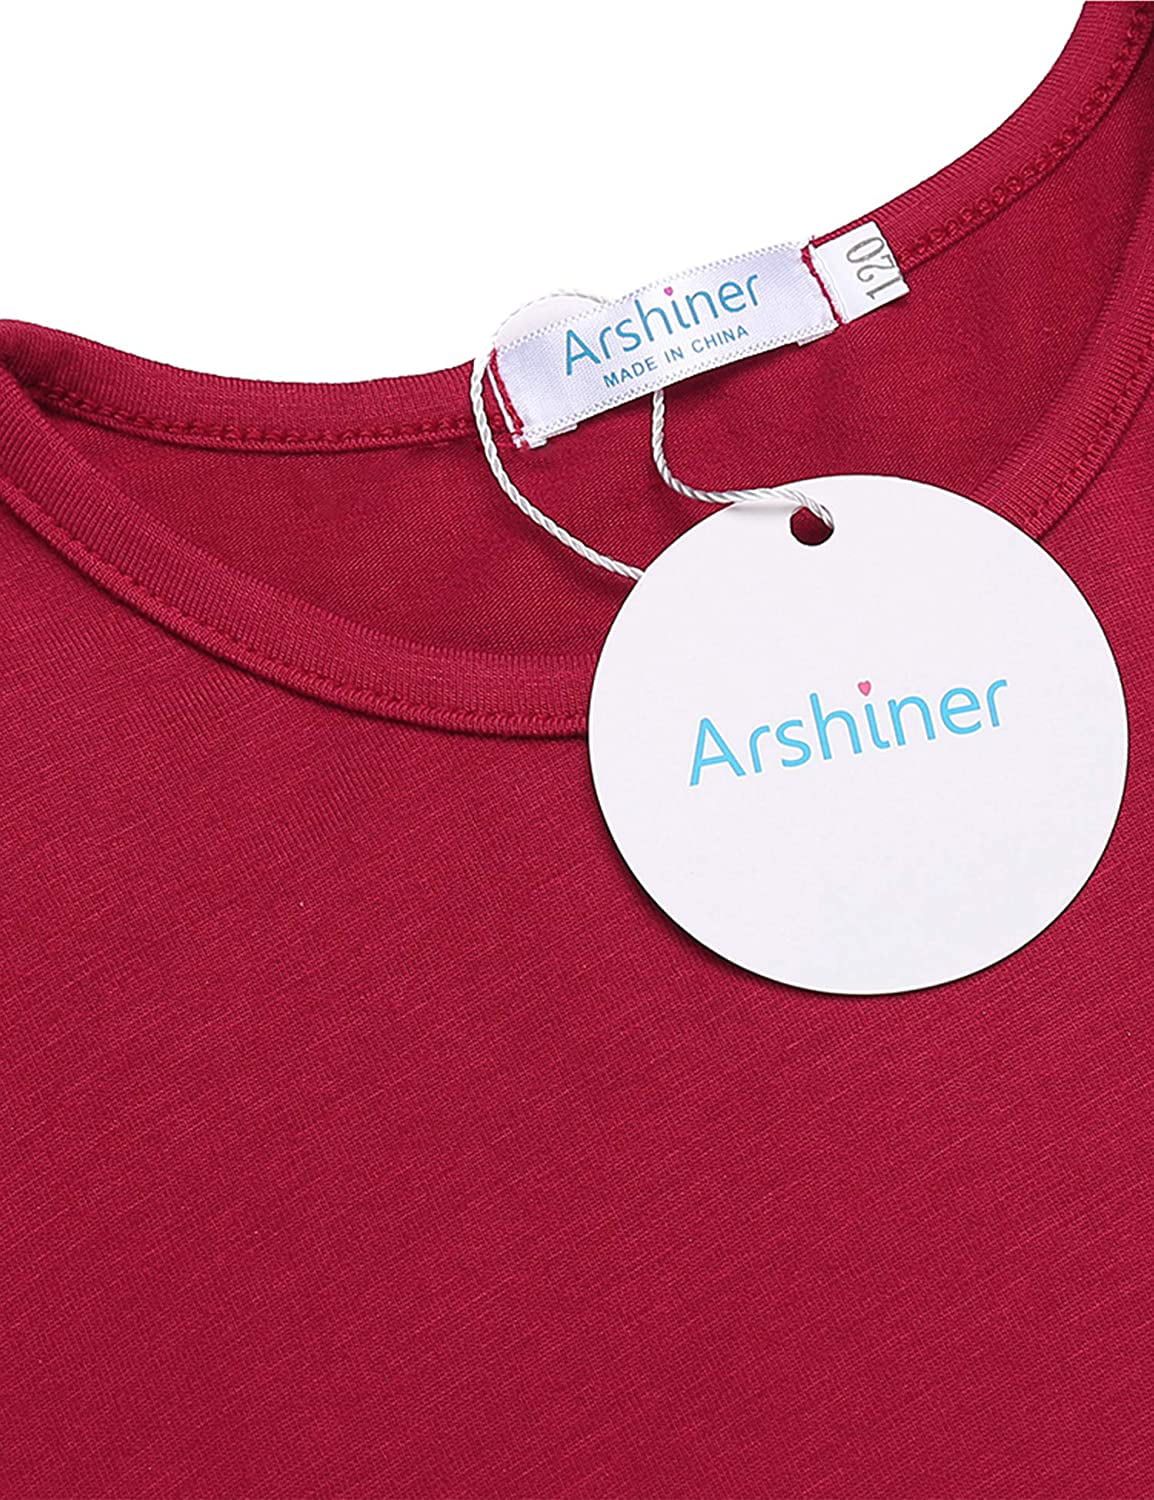 Arshiner Girls Casual Tunic Tops Short/Long Sleeve Loose Soft Blouse T-Shirt for 4-12 Years 